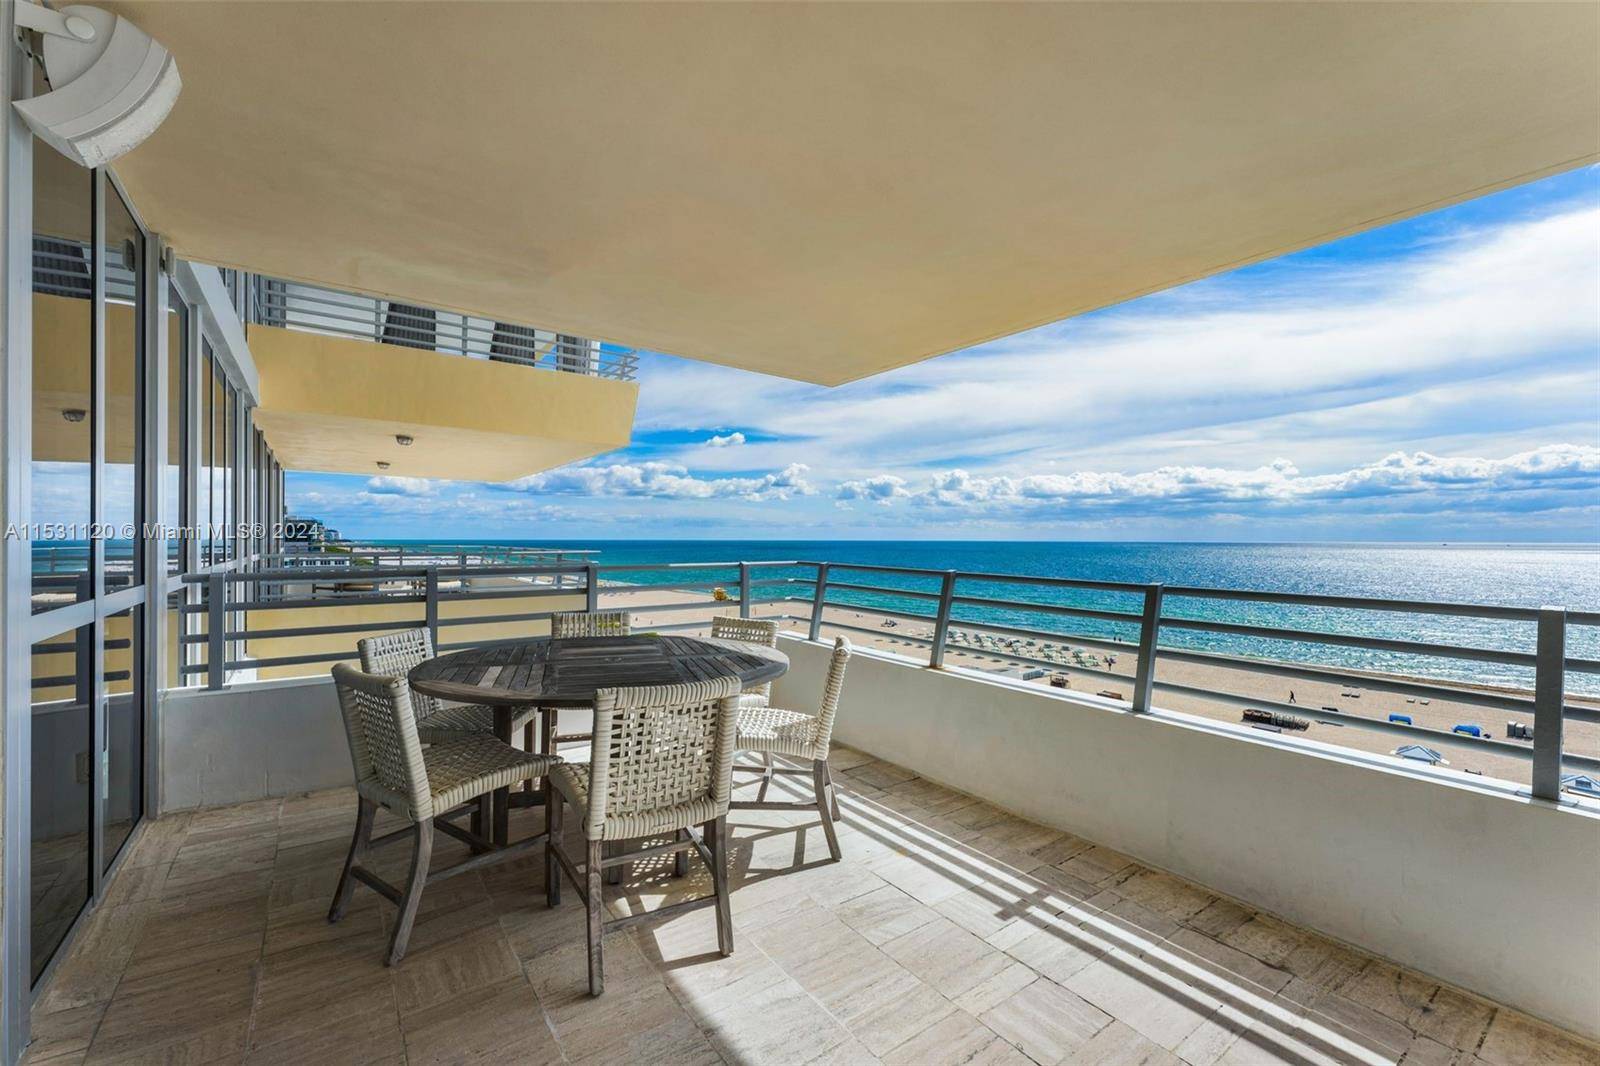 Stunning unit direct ocean facing in the heart of Miami Beach the prestigious South of Fifth residential area.